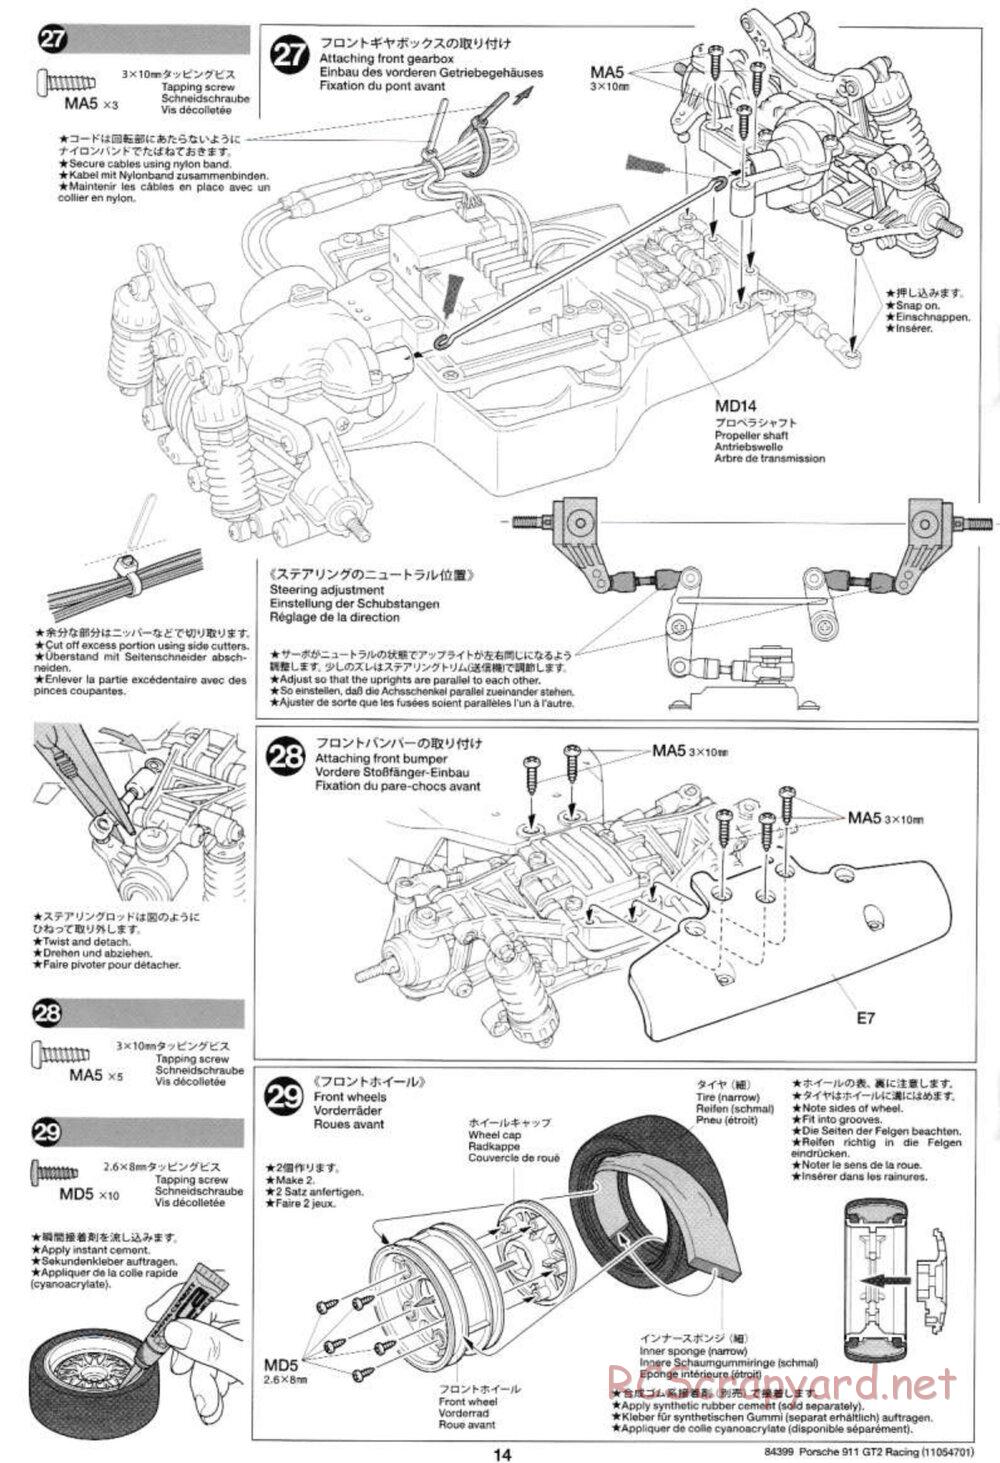 Tamiya - Porsche 911 GT2 Racing - TA-02SW Chassis - Manual - Page 14